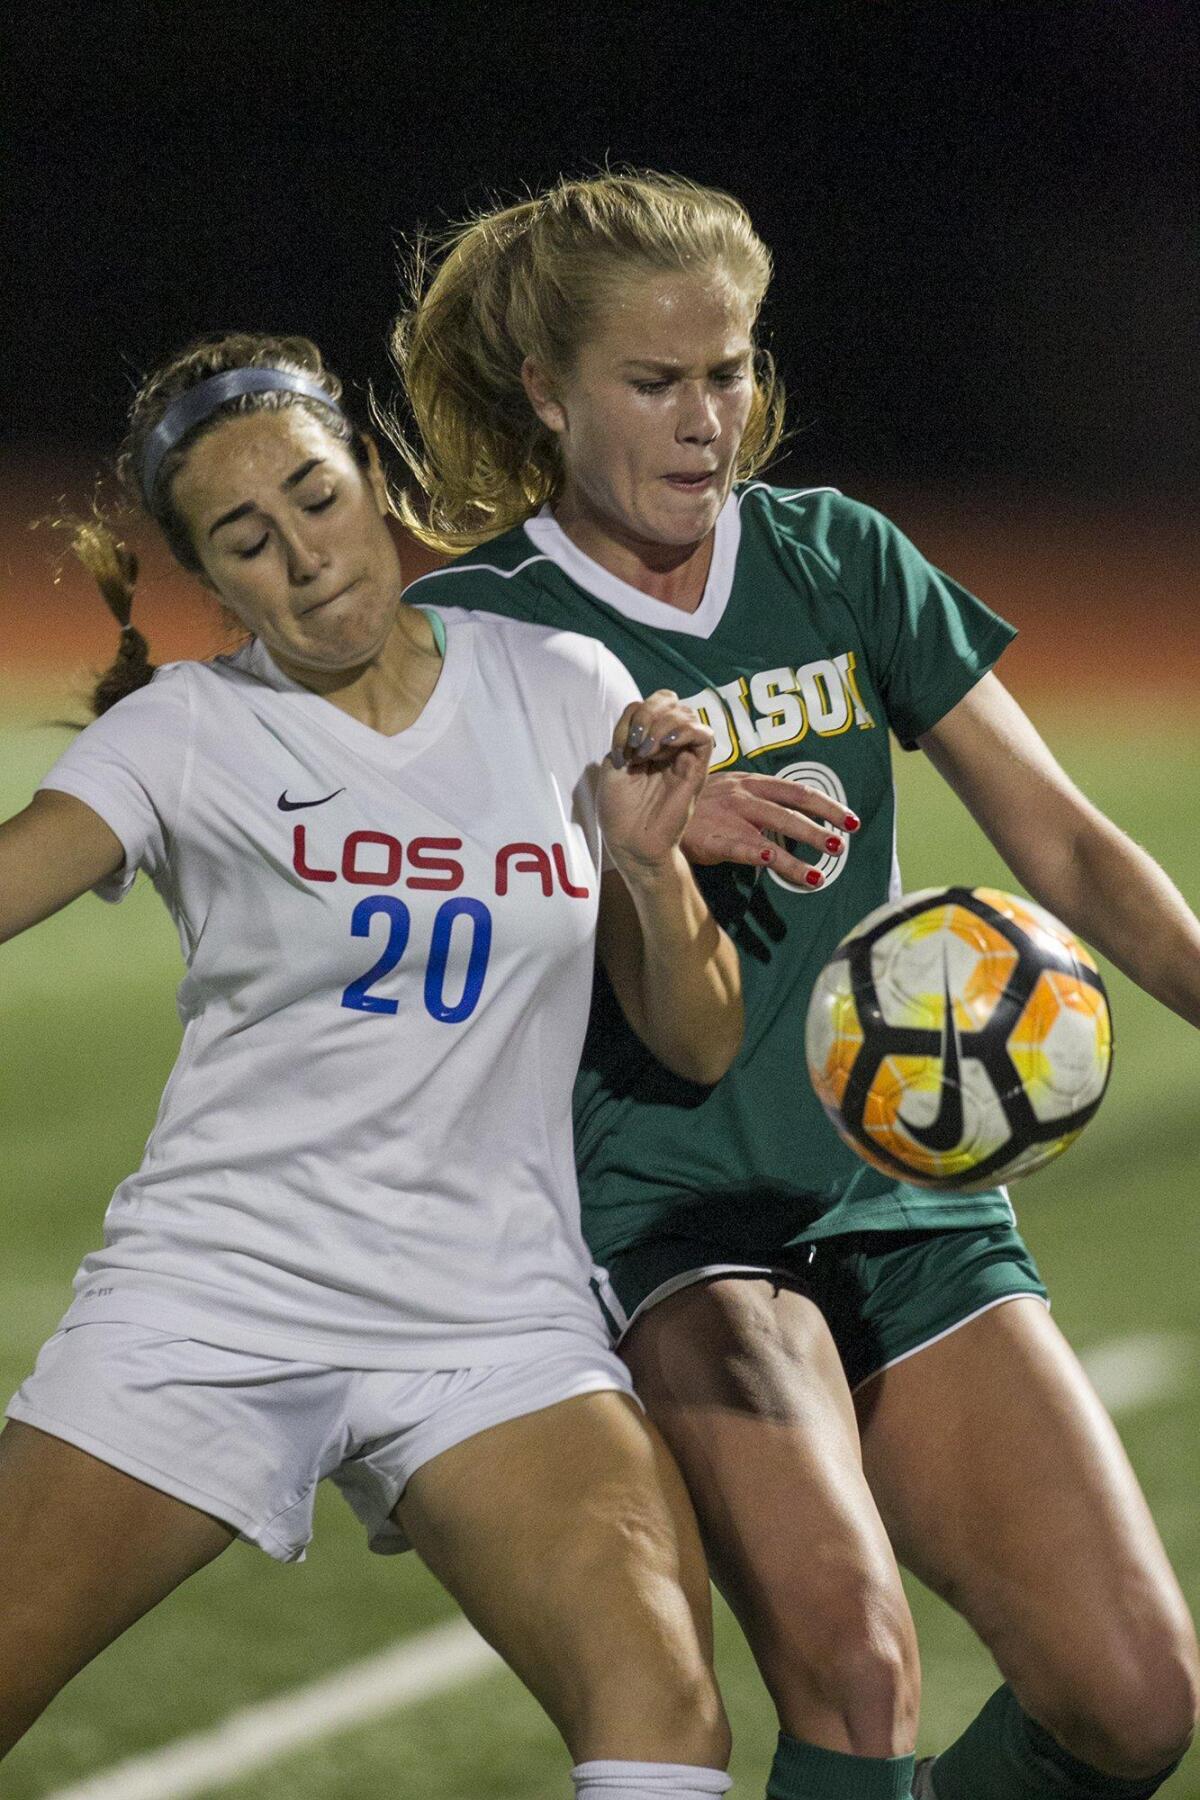 Edison High’s Mikayla Edwards fights for a ball against Los Alamitos' Morgan Meza.